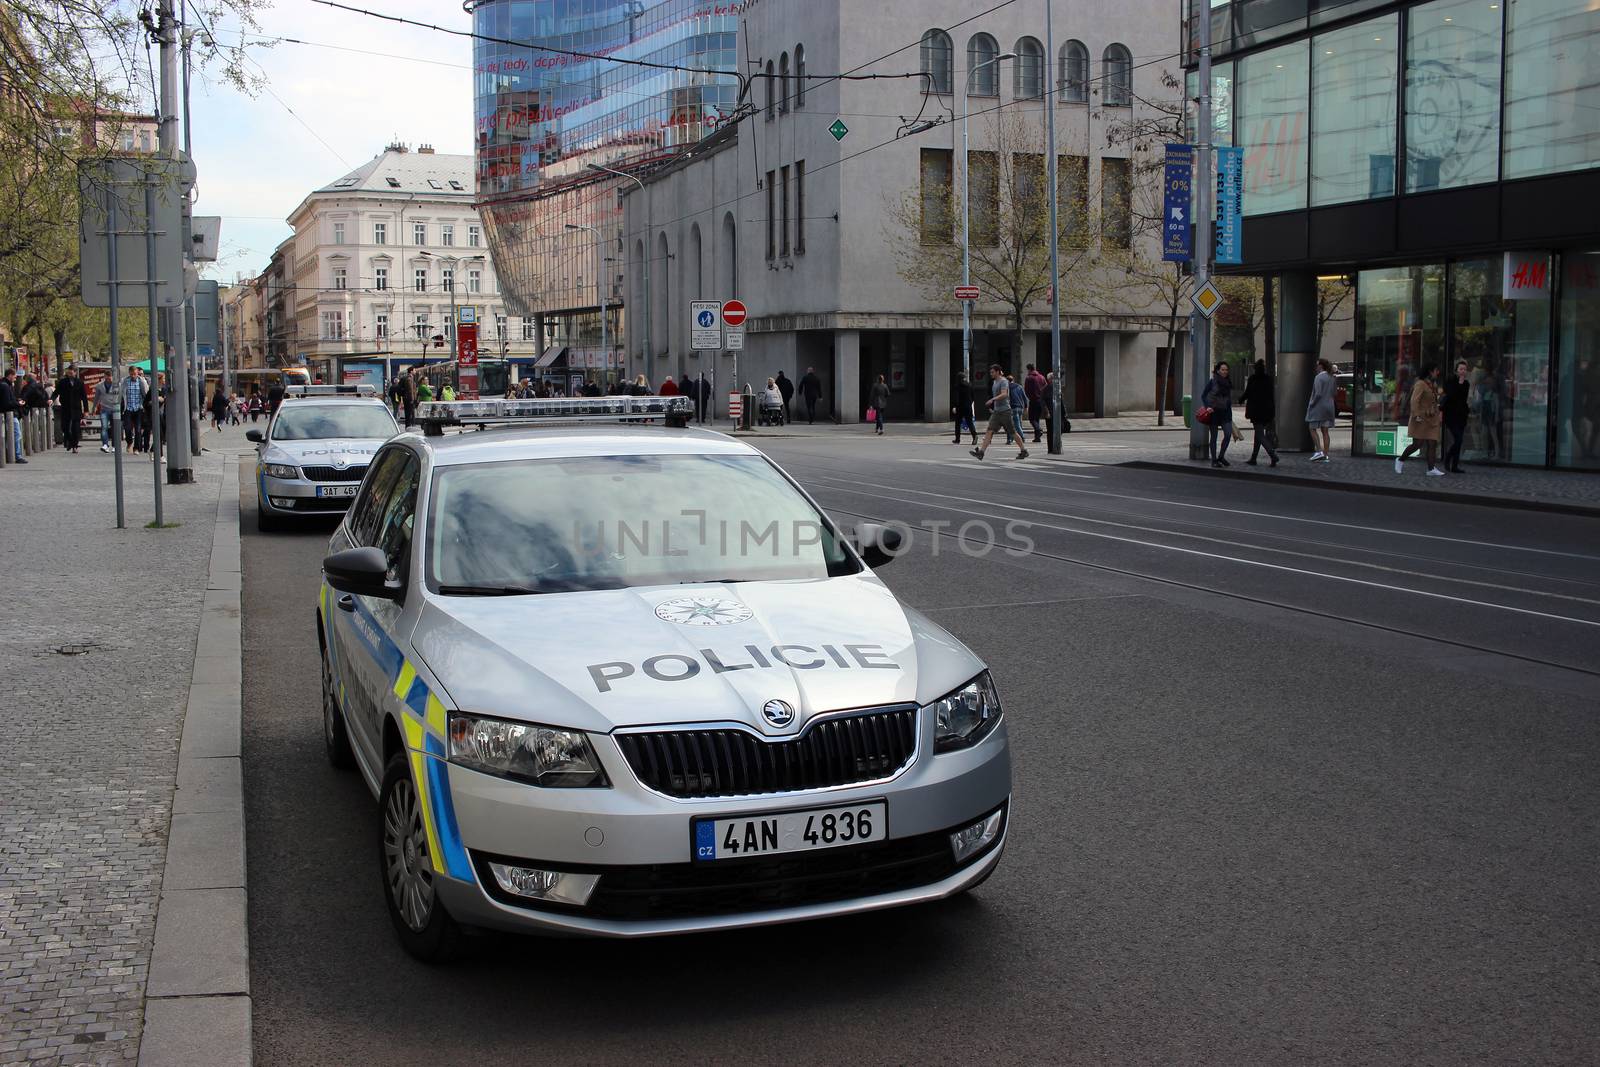 Prague, Czech Republic - April 22, 2016: Two Skoda Octavia Police Cars Parked on the Street in Prague, Nobody in vehicles
